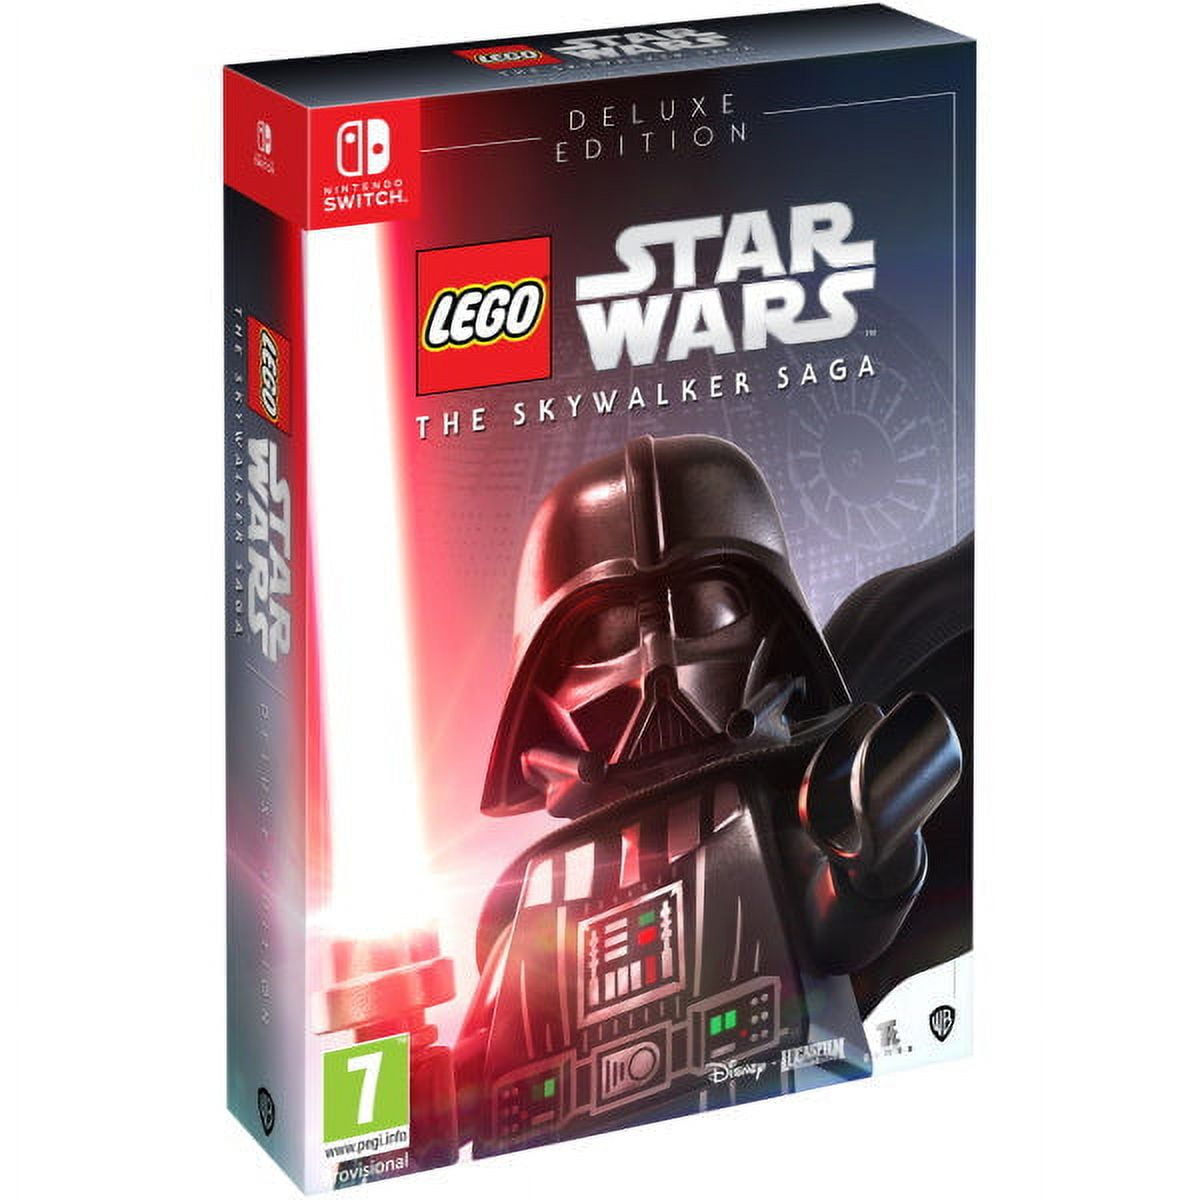 Deluxe Edition of LEGO Star Wars: The Skywalker Saga Features Removal  Slipcover Packaging - Jedi News